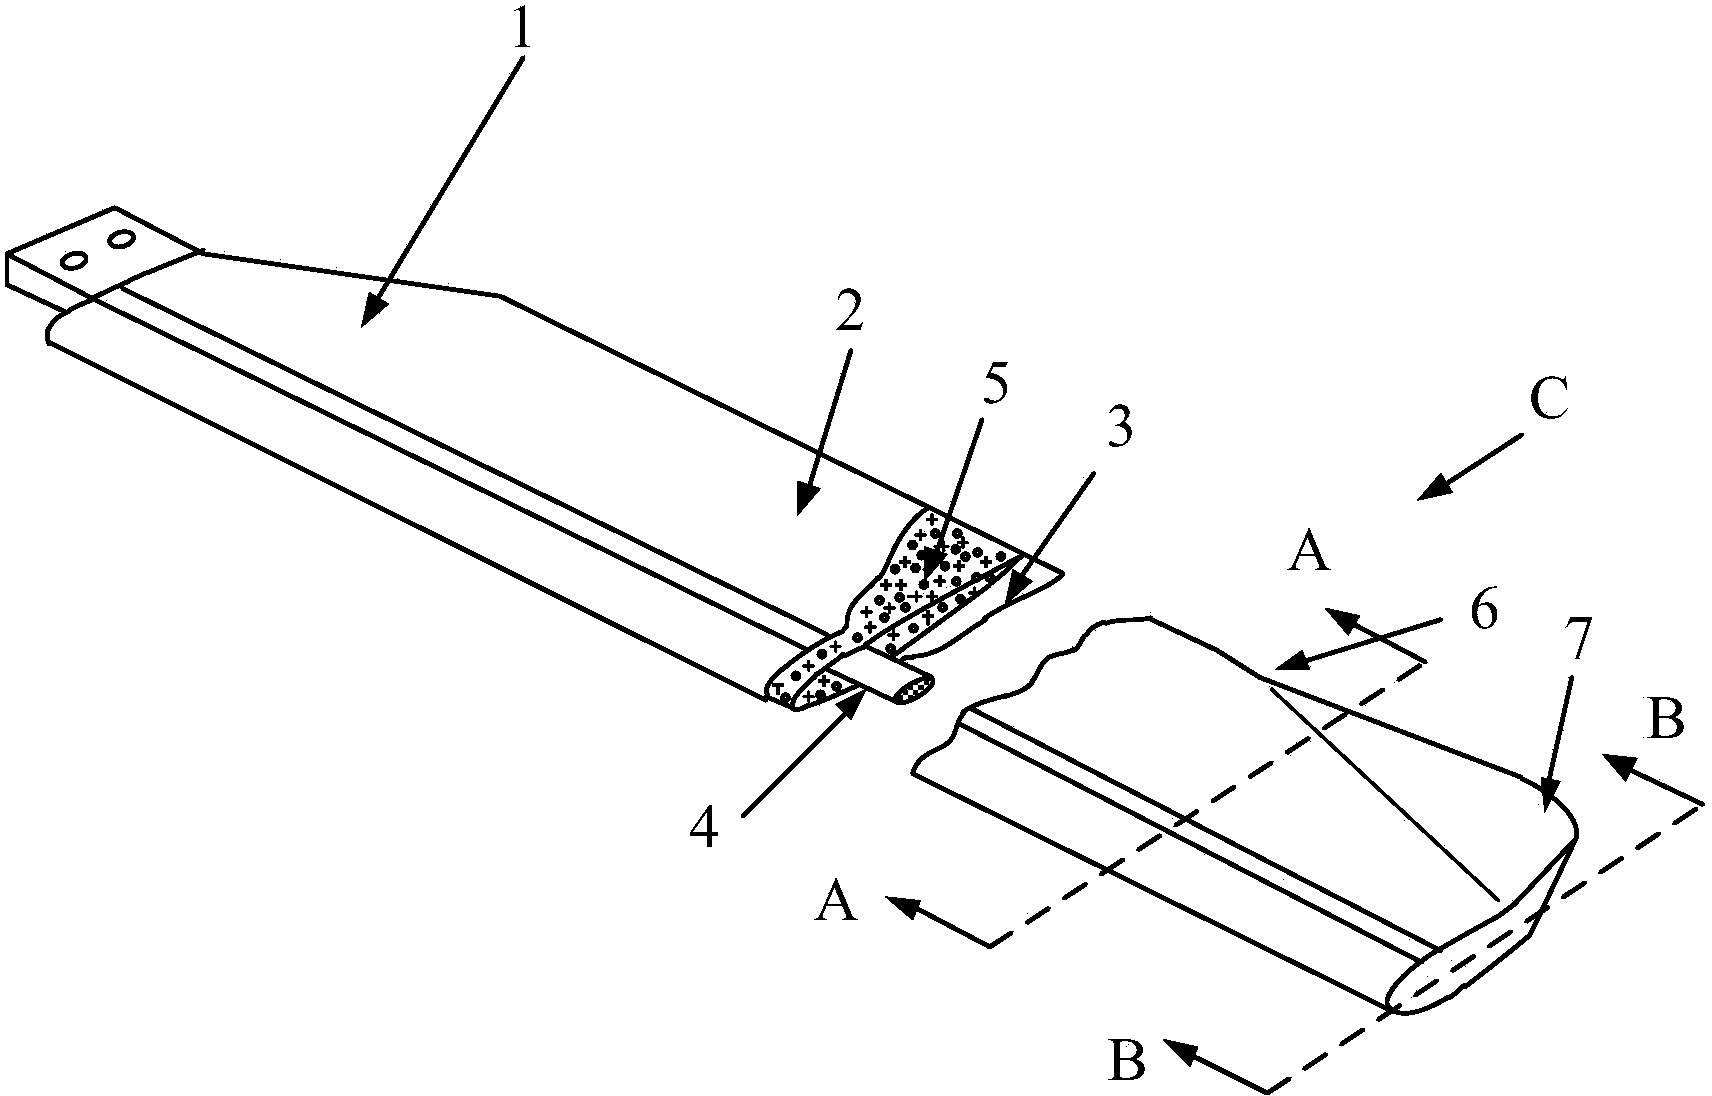 Rotor blade structure design capable of inhibiting rotation chattering of tilt rotor